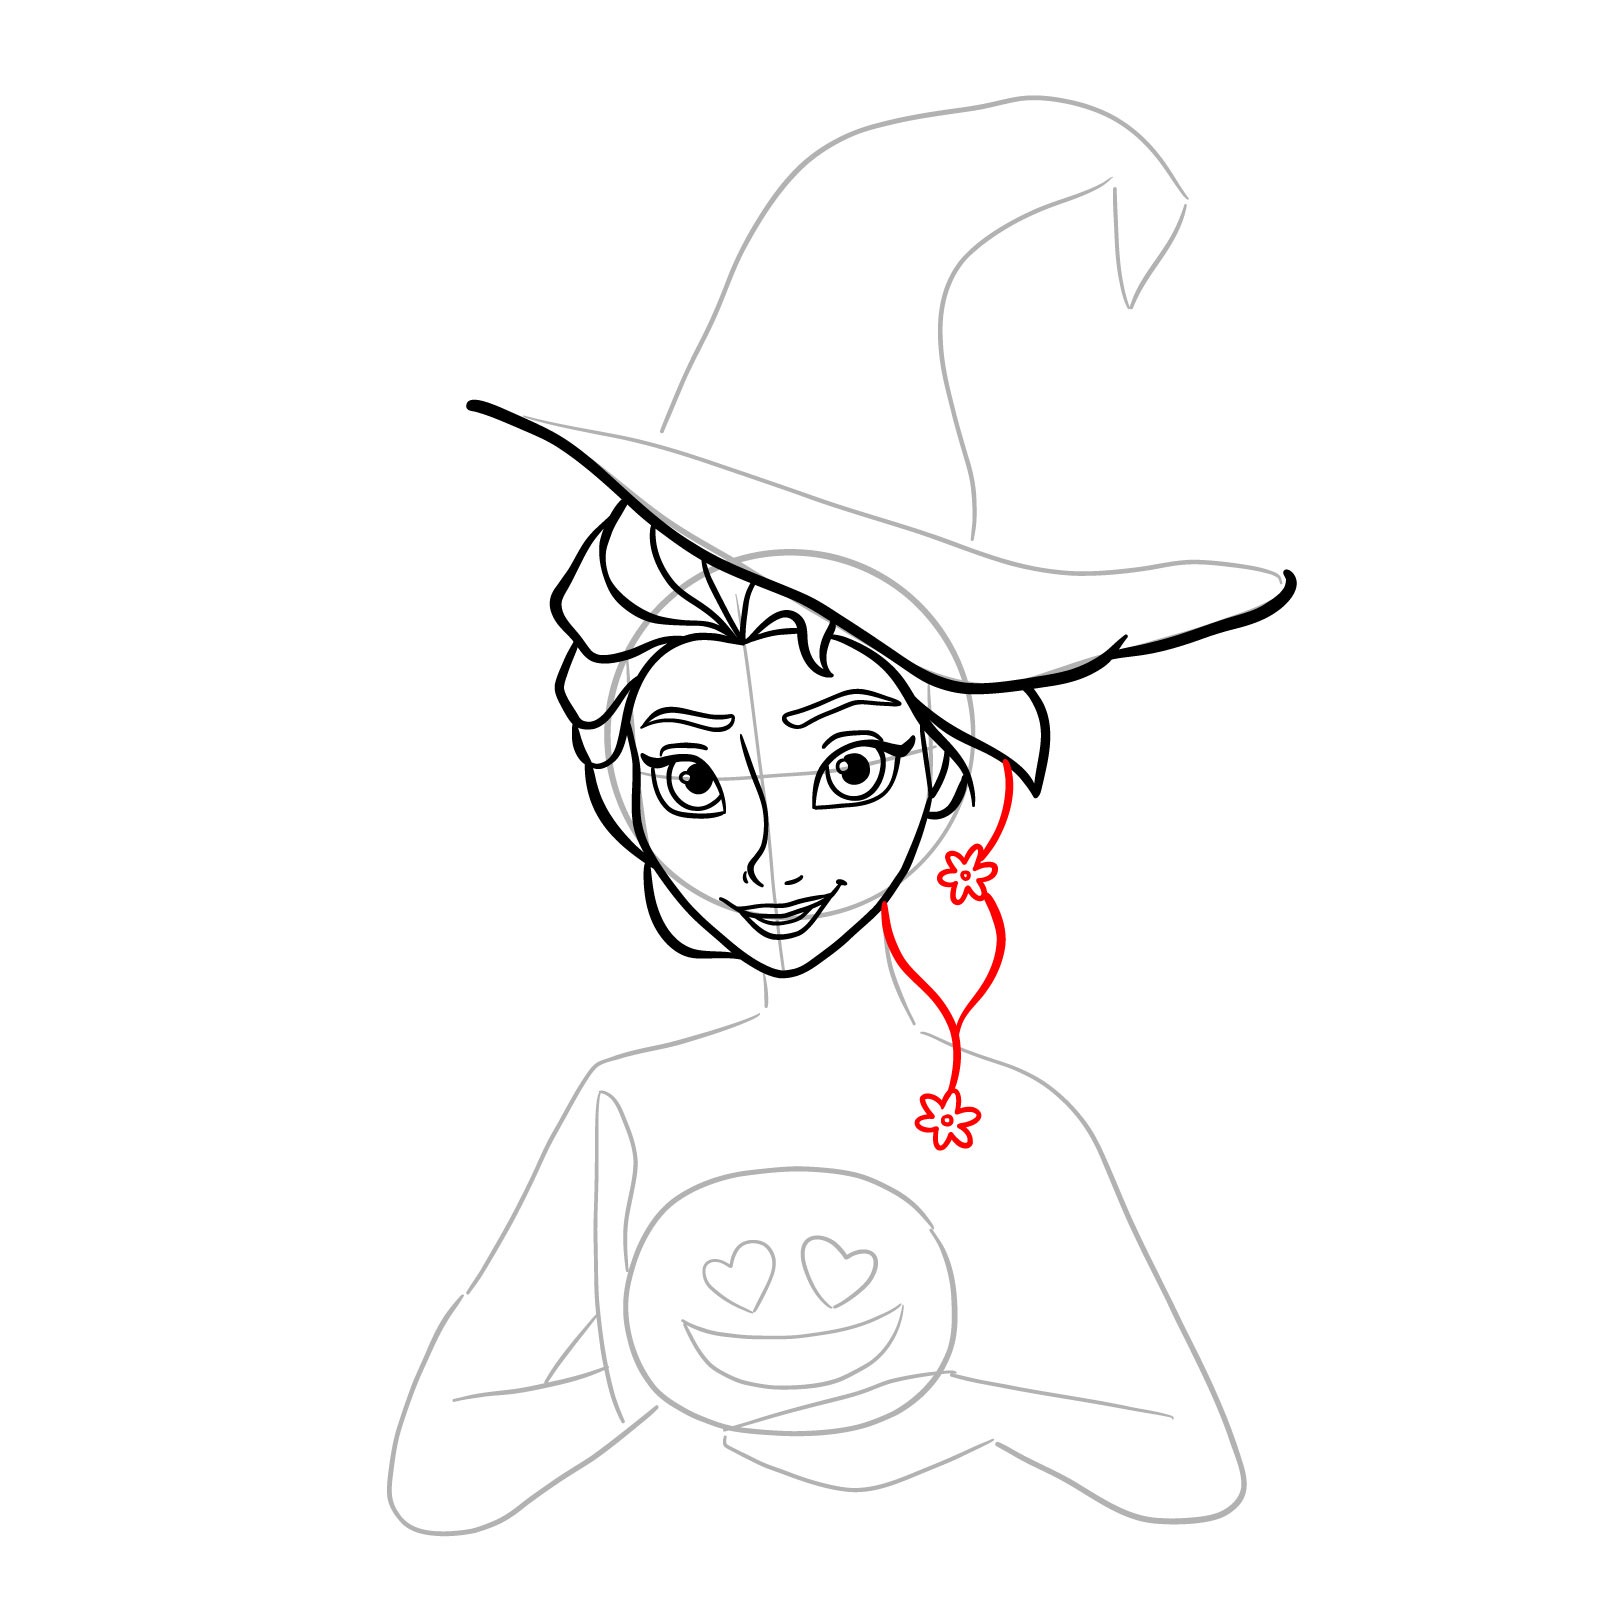 How to Draw Witch Elsa on Halloween - step 14